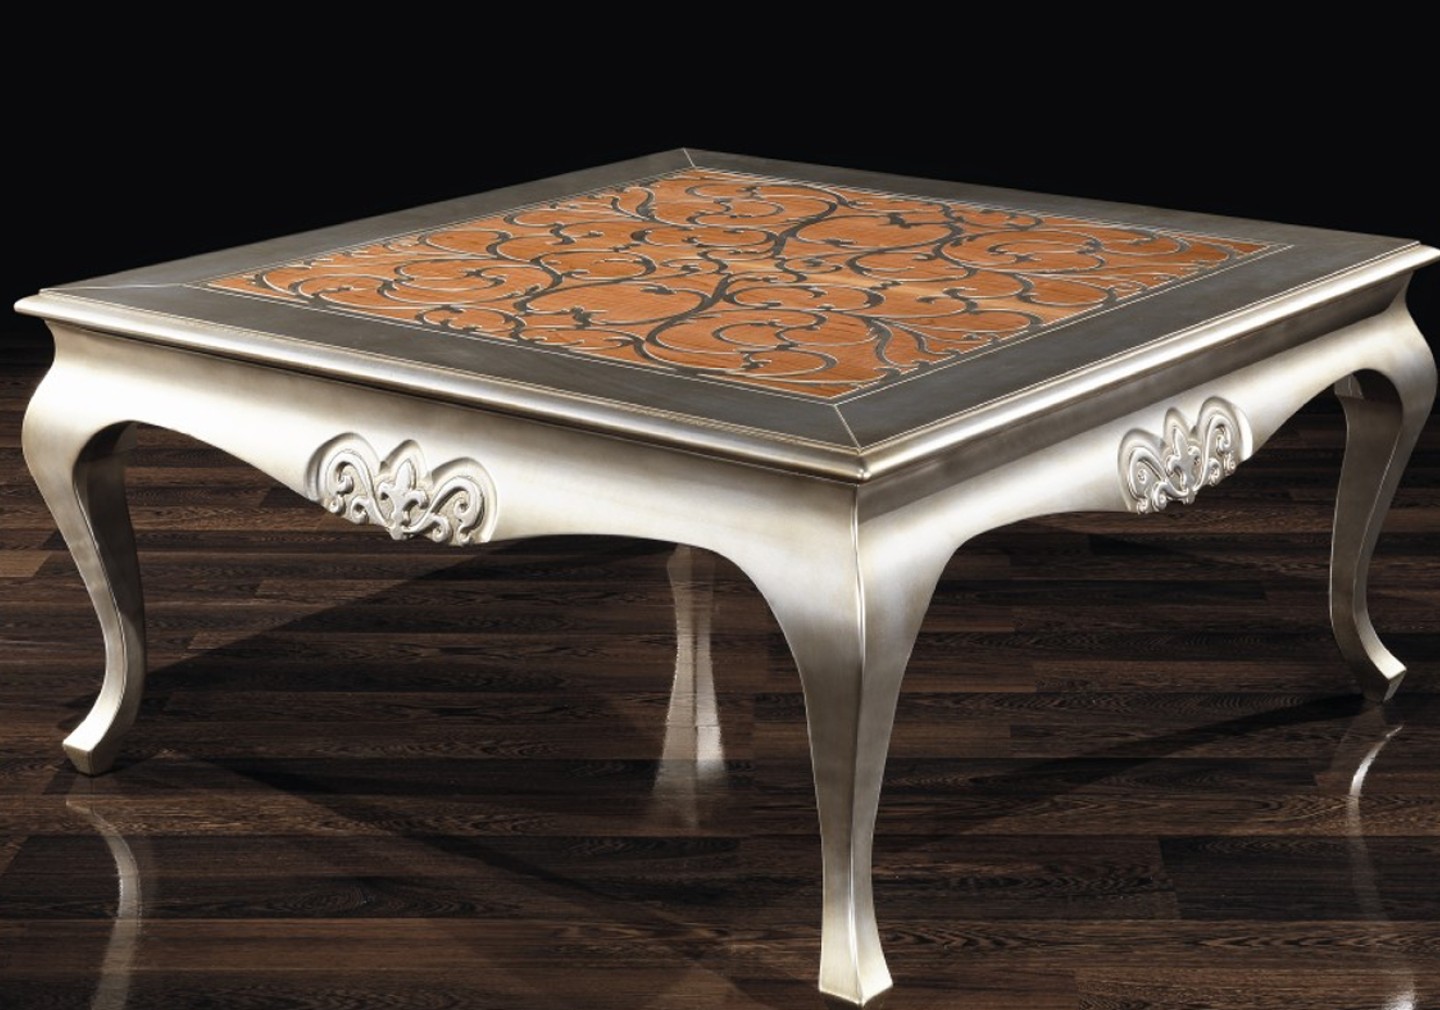 THE ROMI CLASSIC COFFEE TABLE